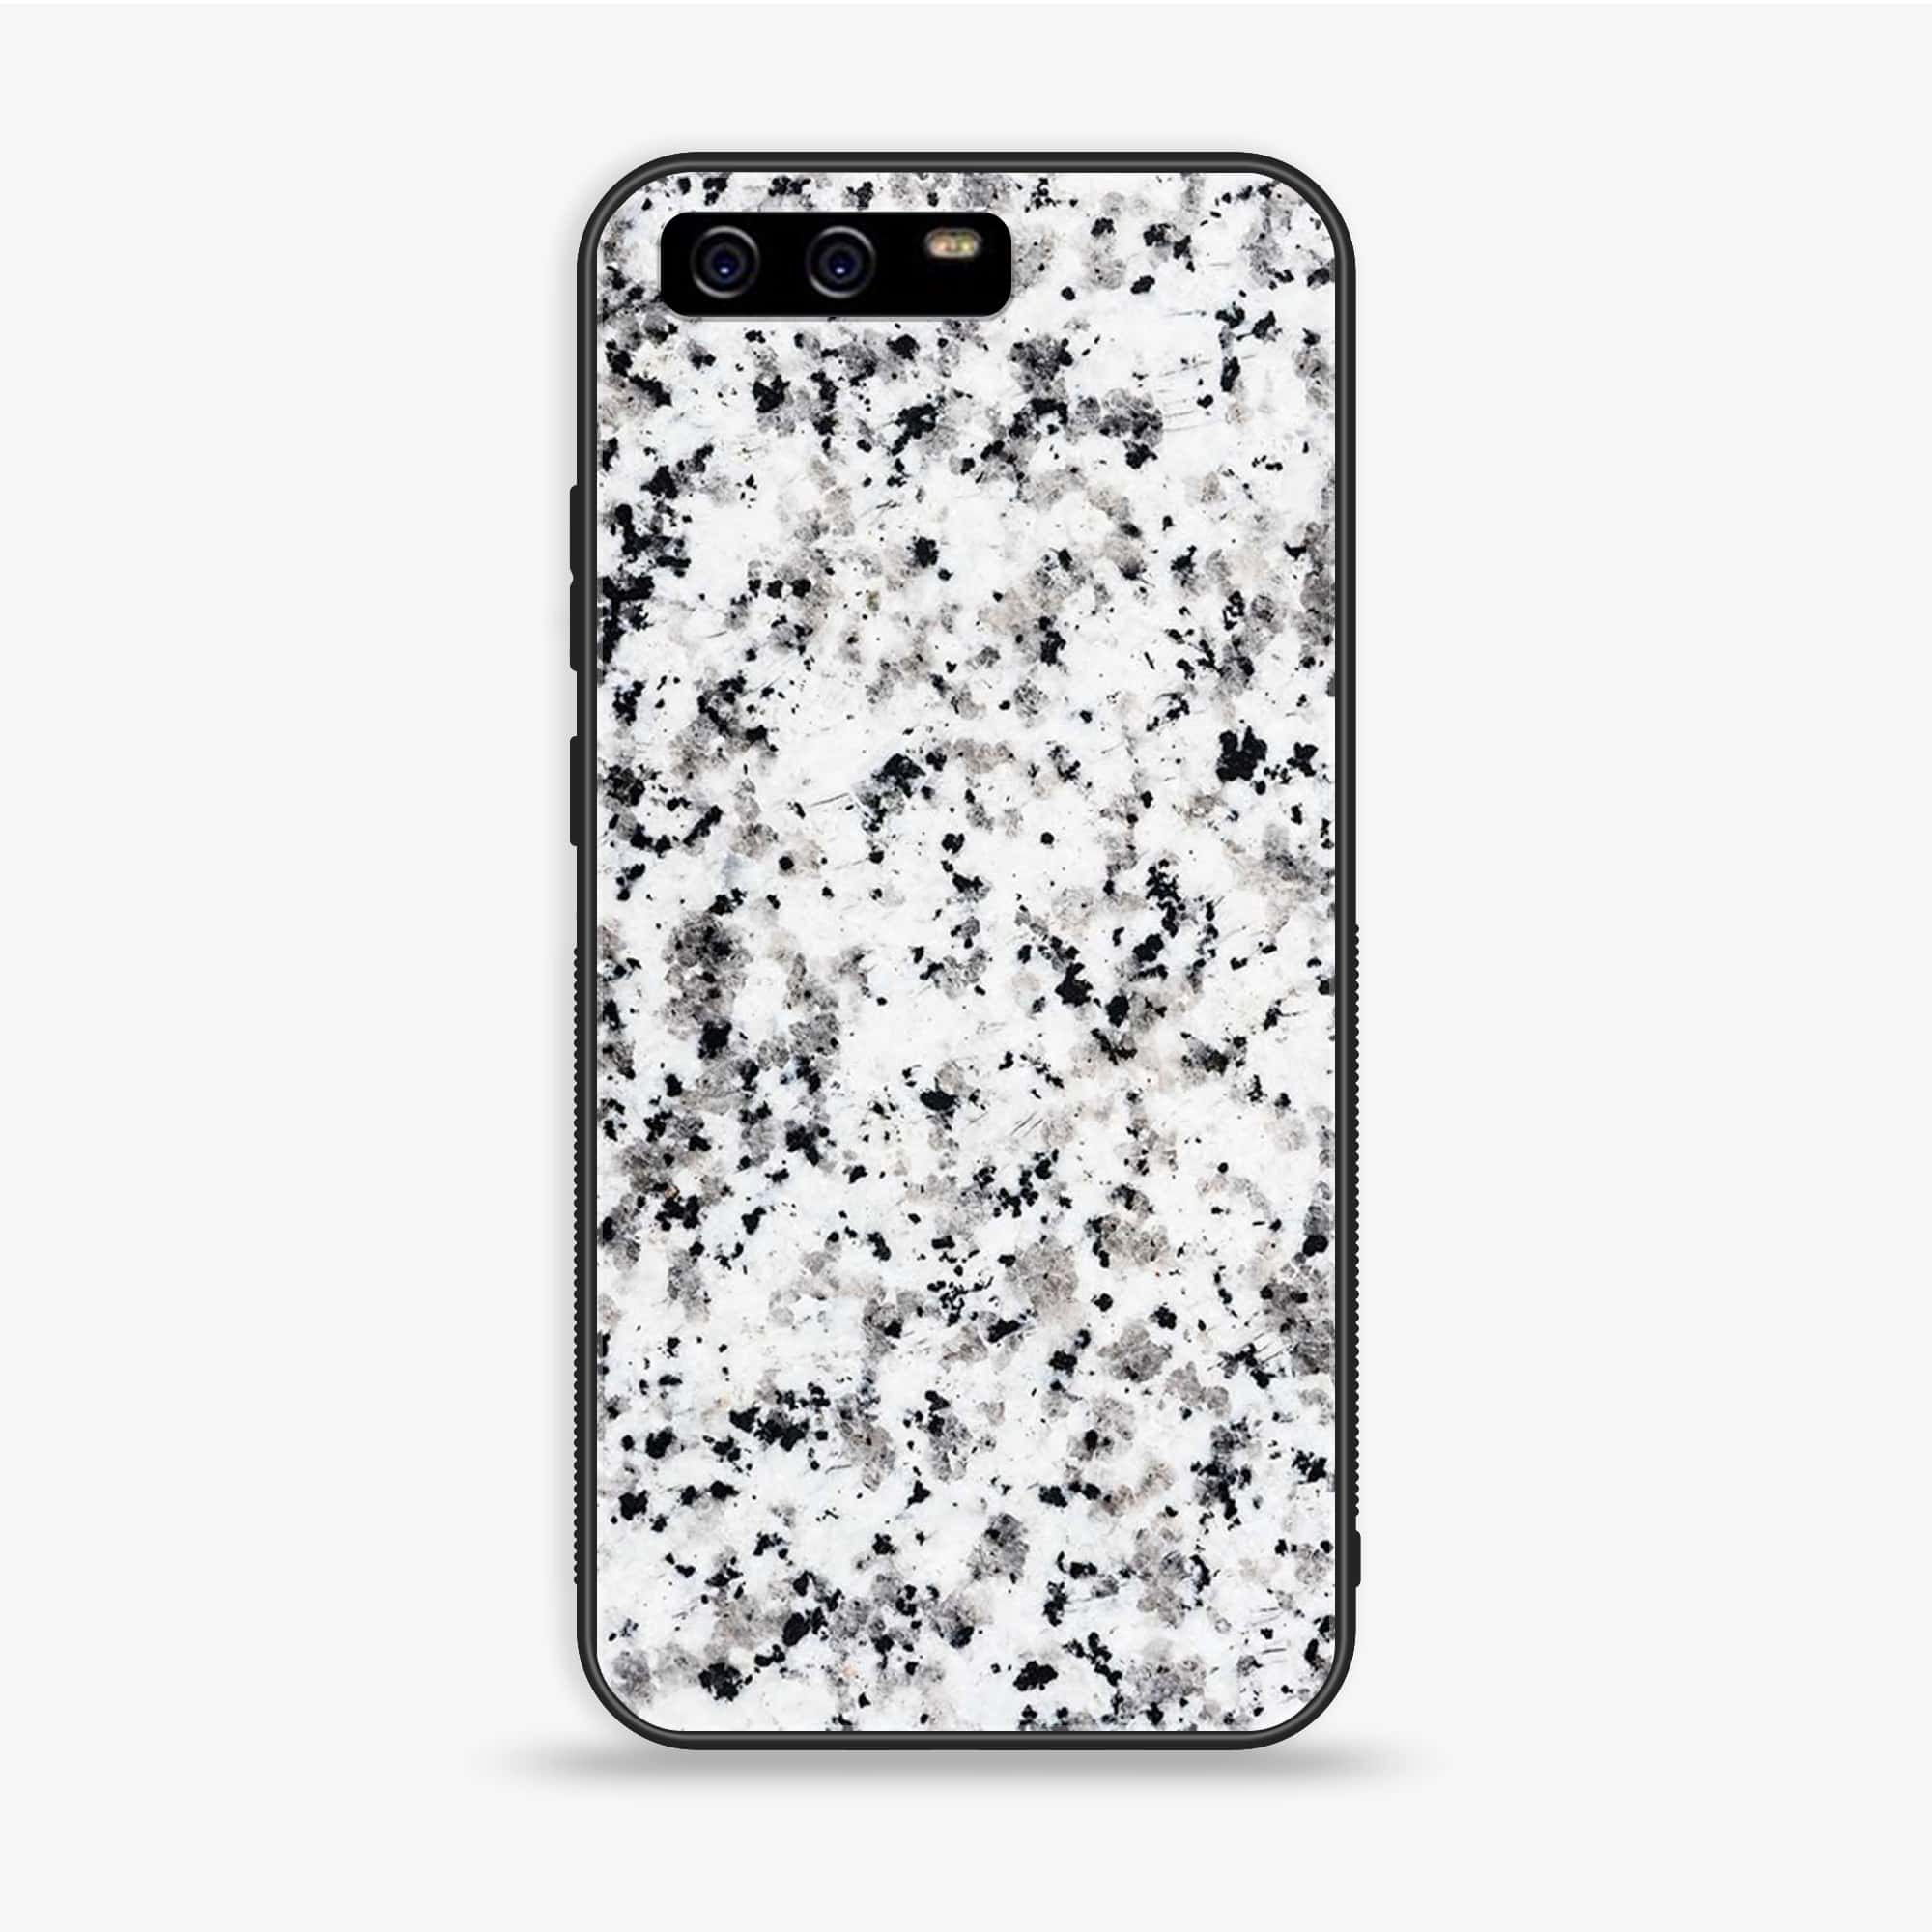 Huawei P10 - White Marble Series - Premium Printed Glass soft Bumper shock Proof Case